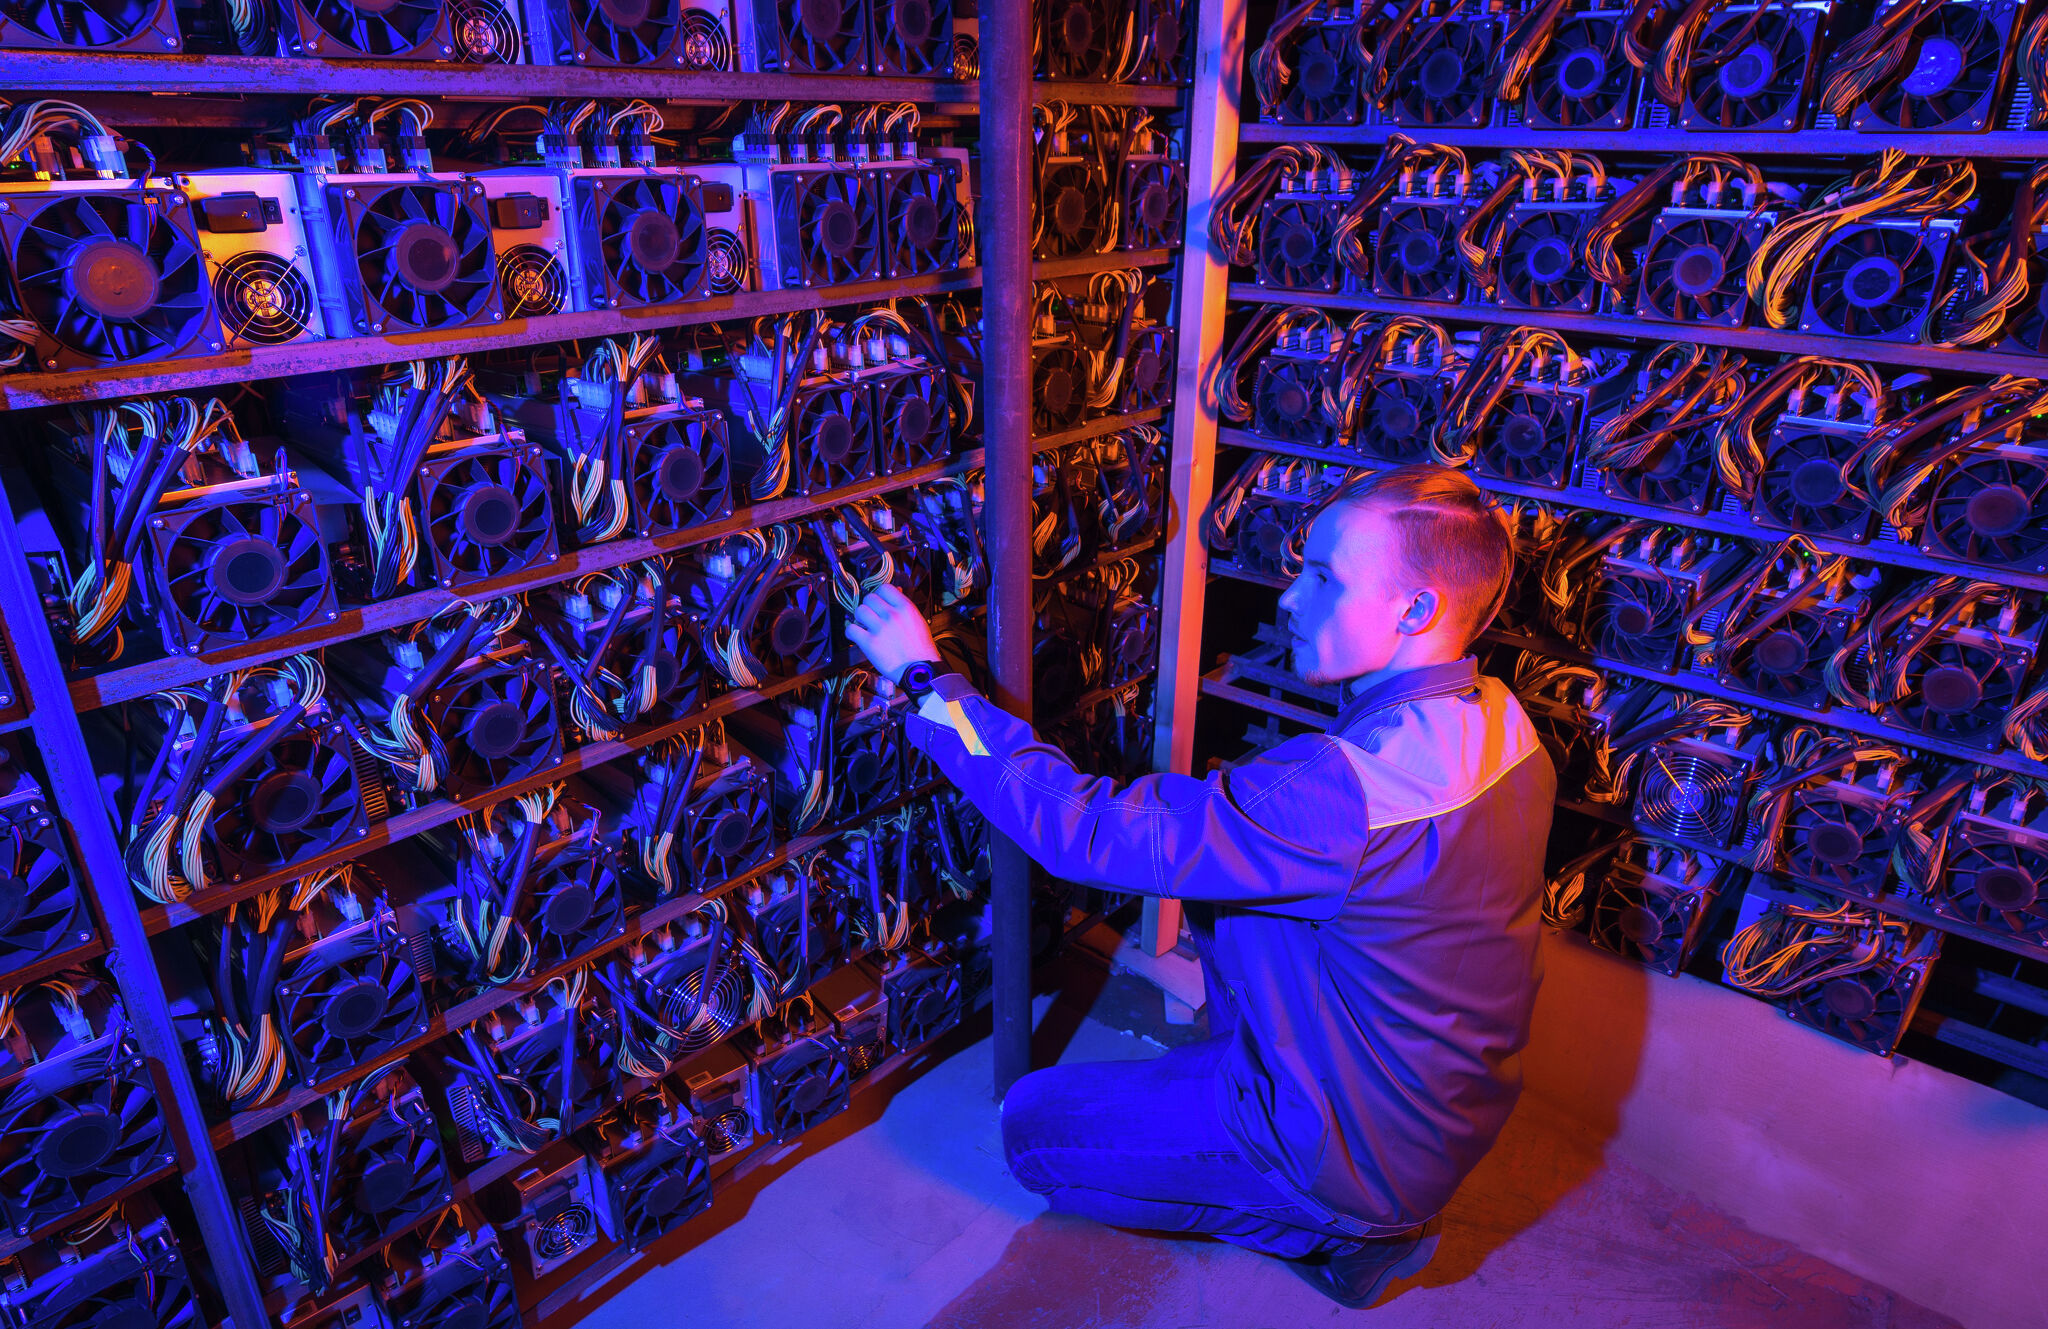 China to shut down over 90% of its Bitcoin mining capacity after